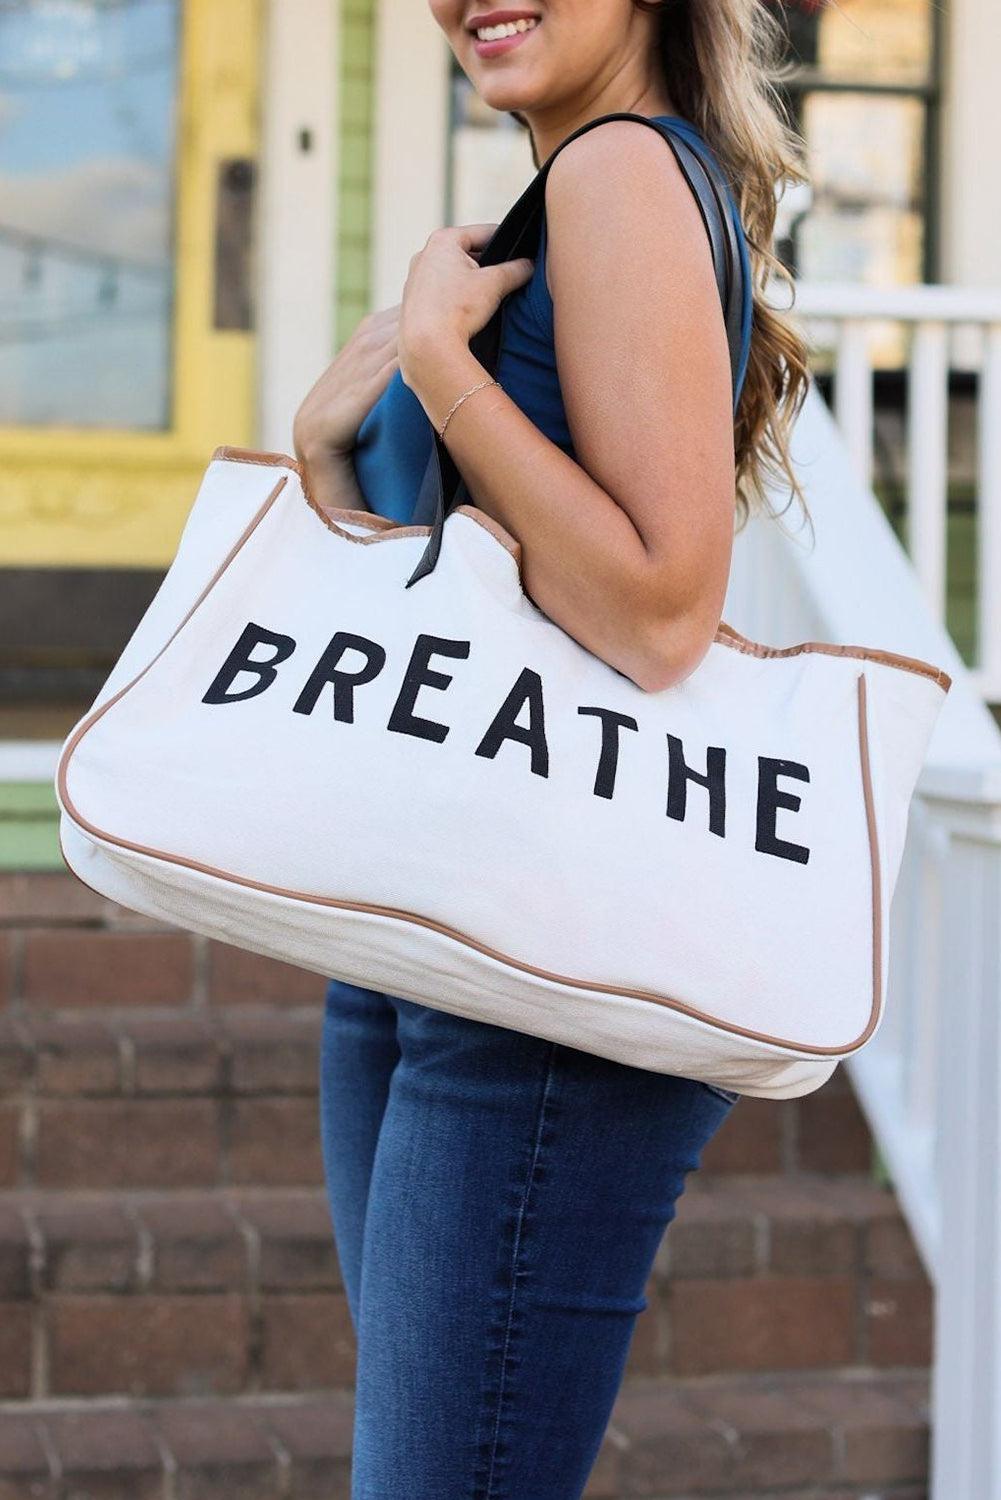 White Vacation BREATHE Contrast Trim Large Tote Bag